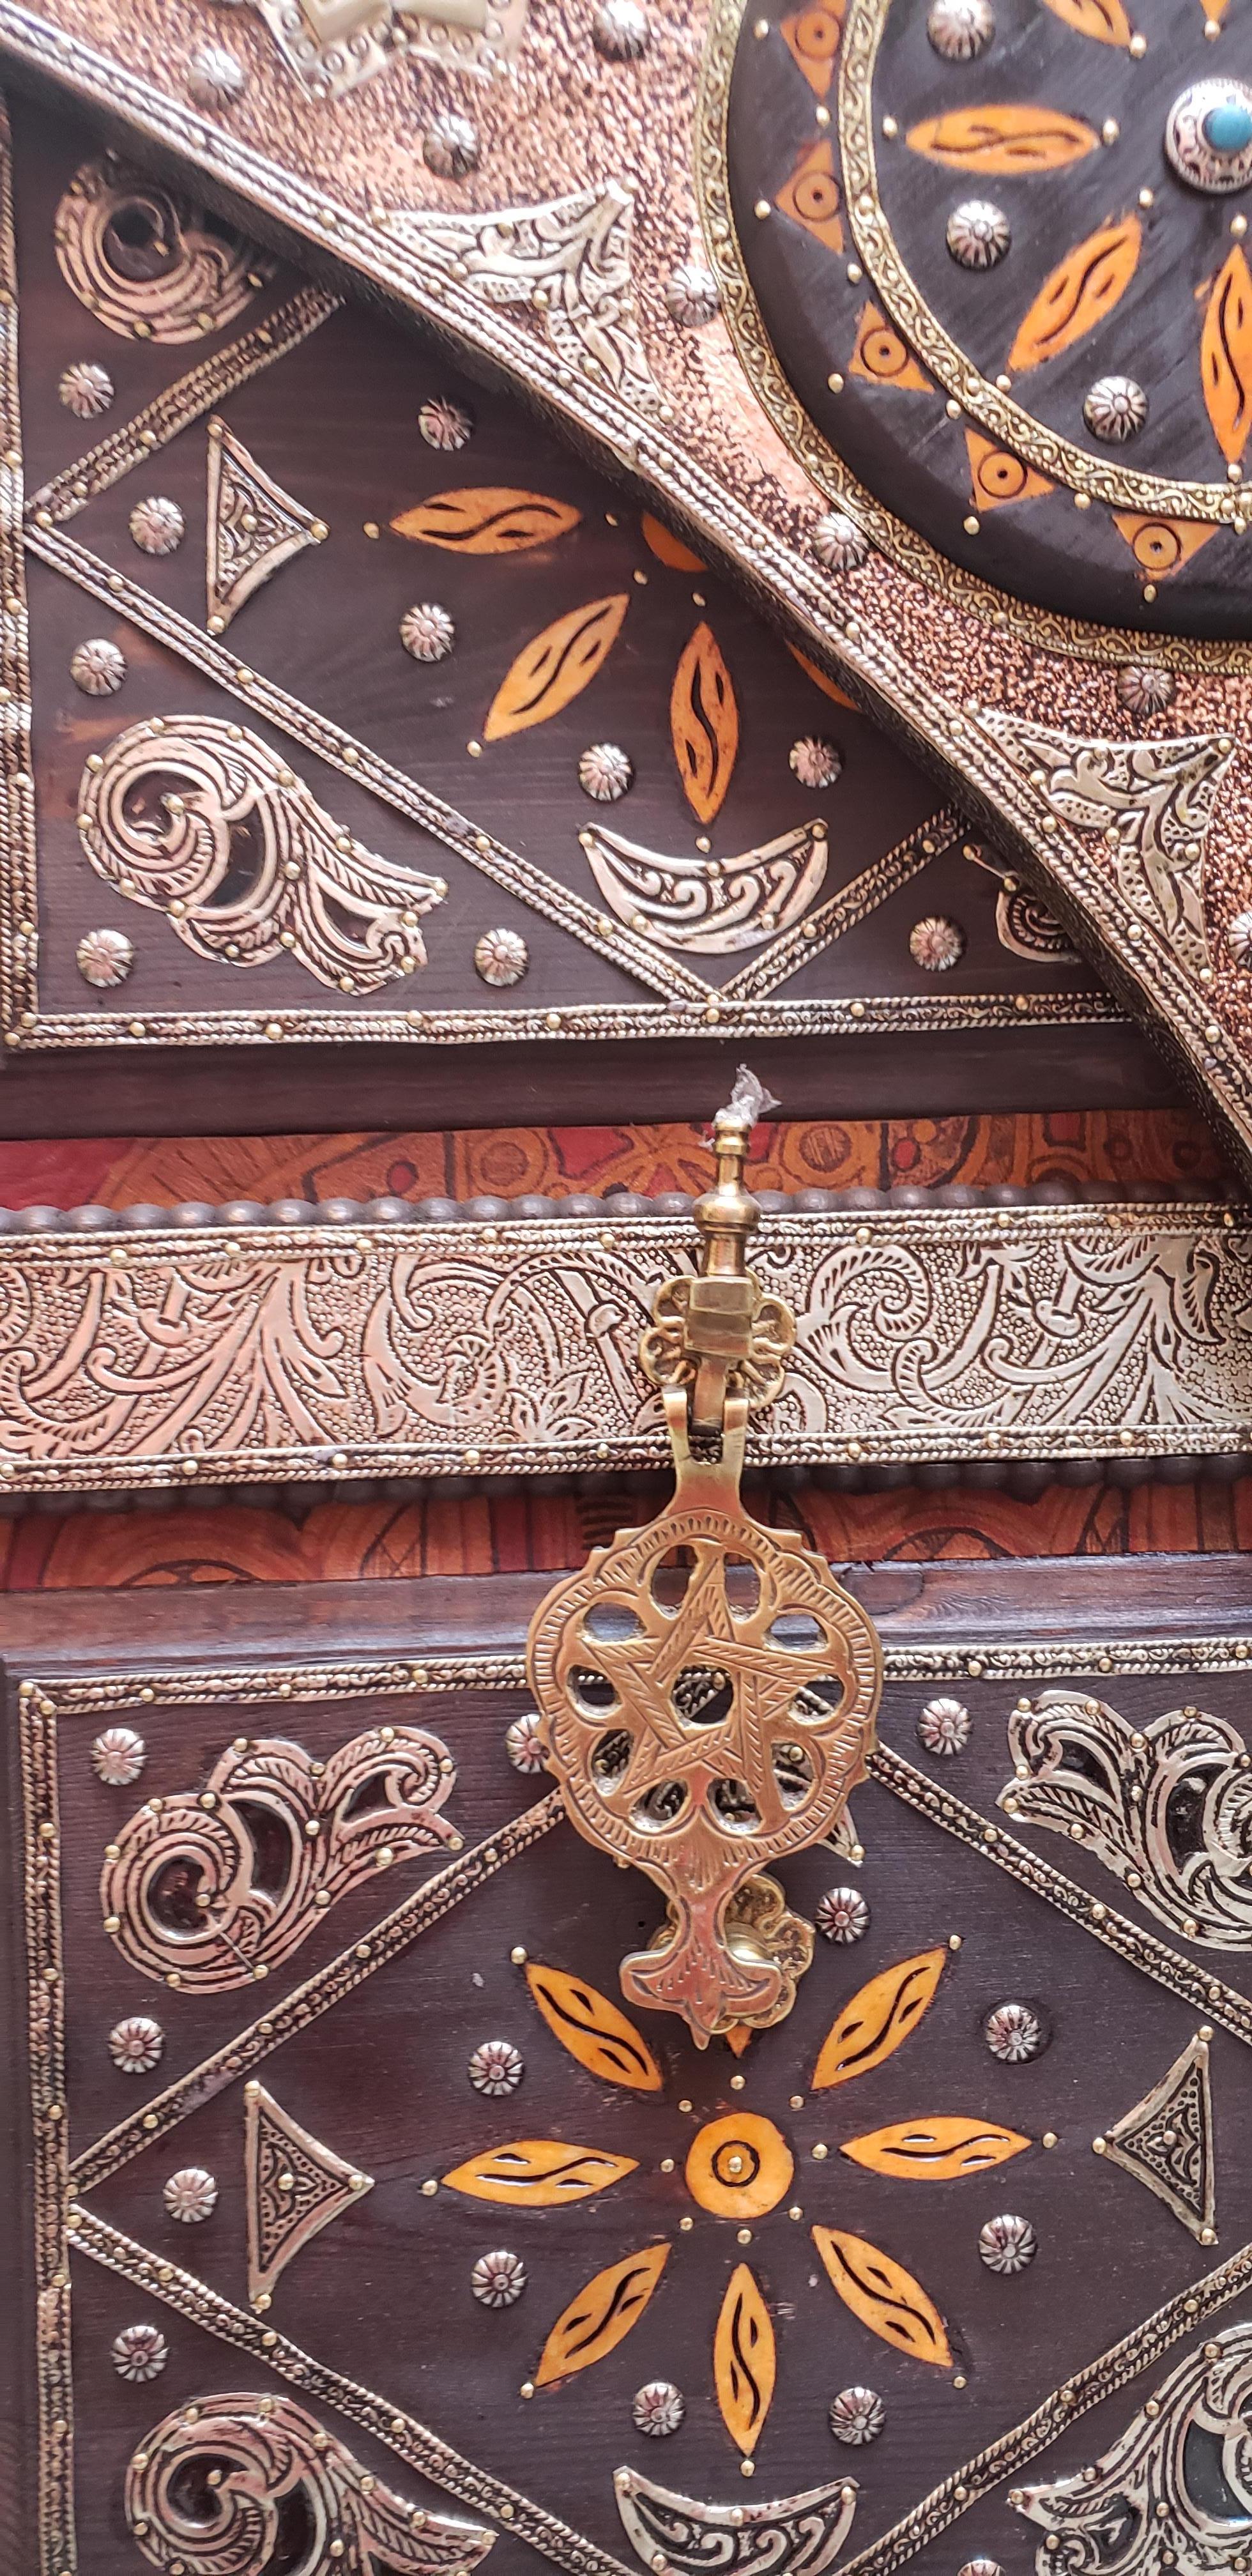 Moroccan Amazing Chefchaouen Wooden Door All Inlaid, LM24 / 2 For Sale